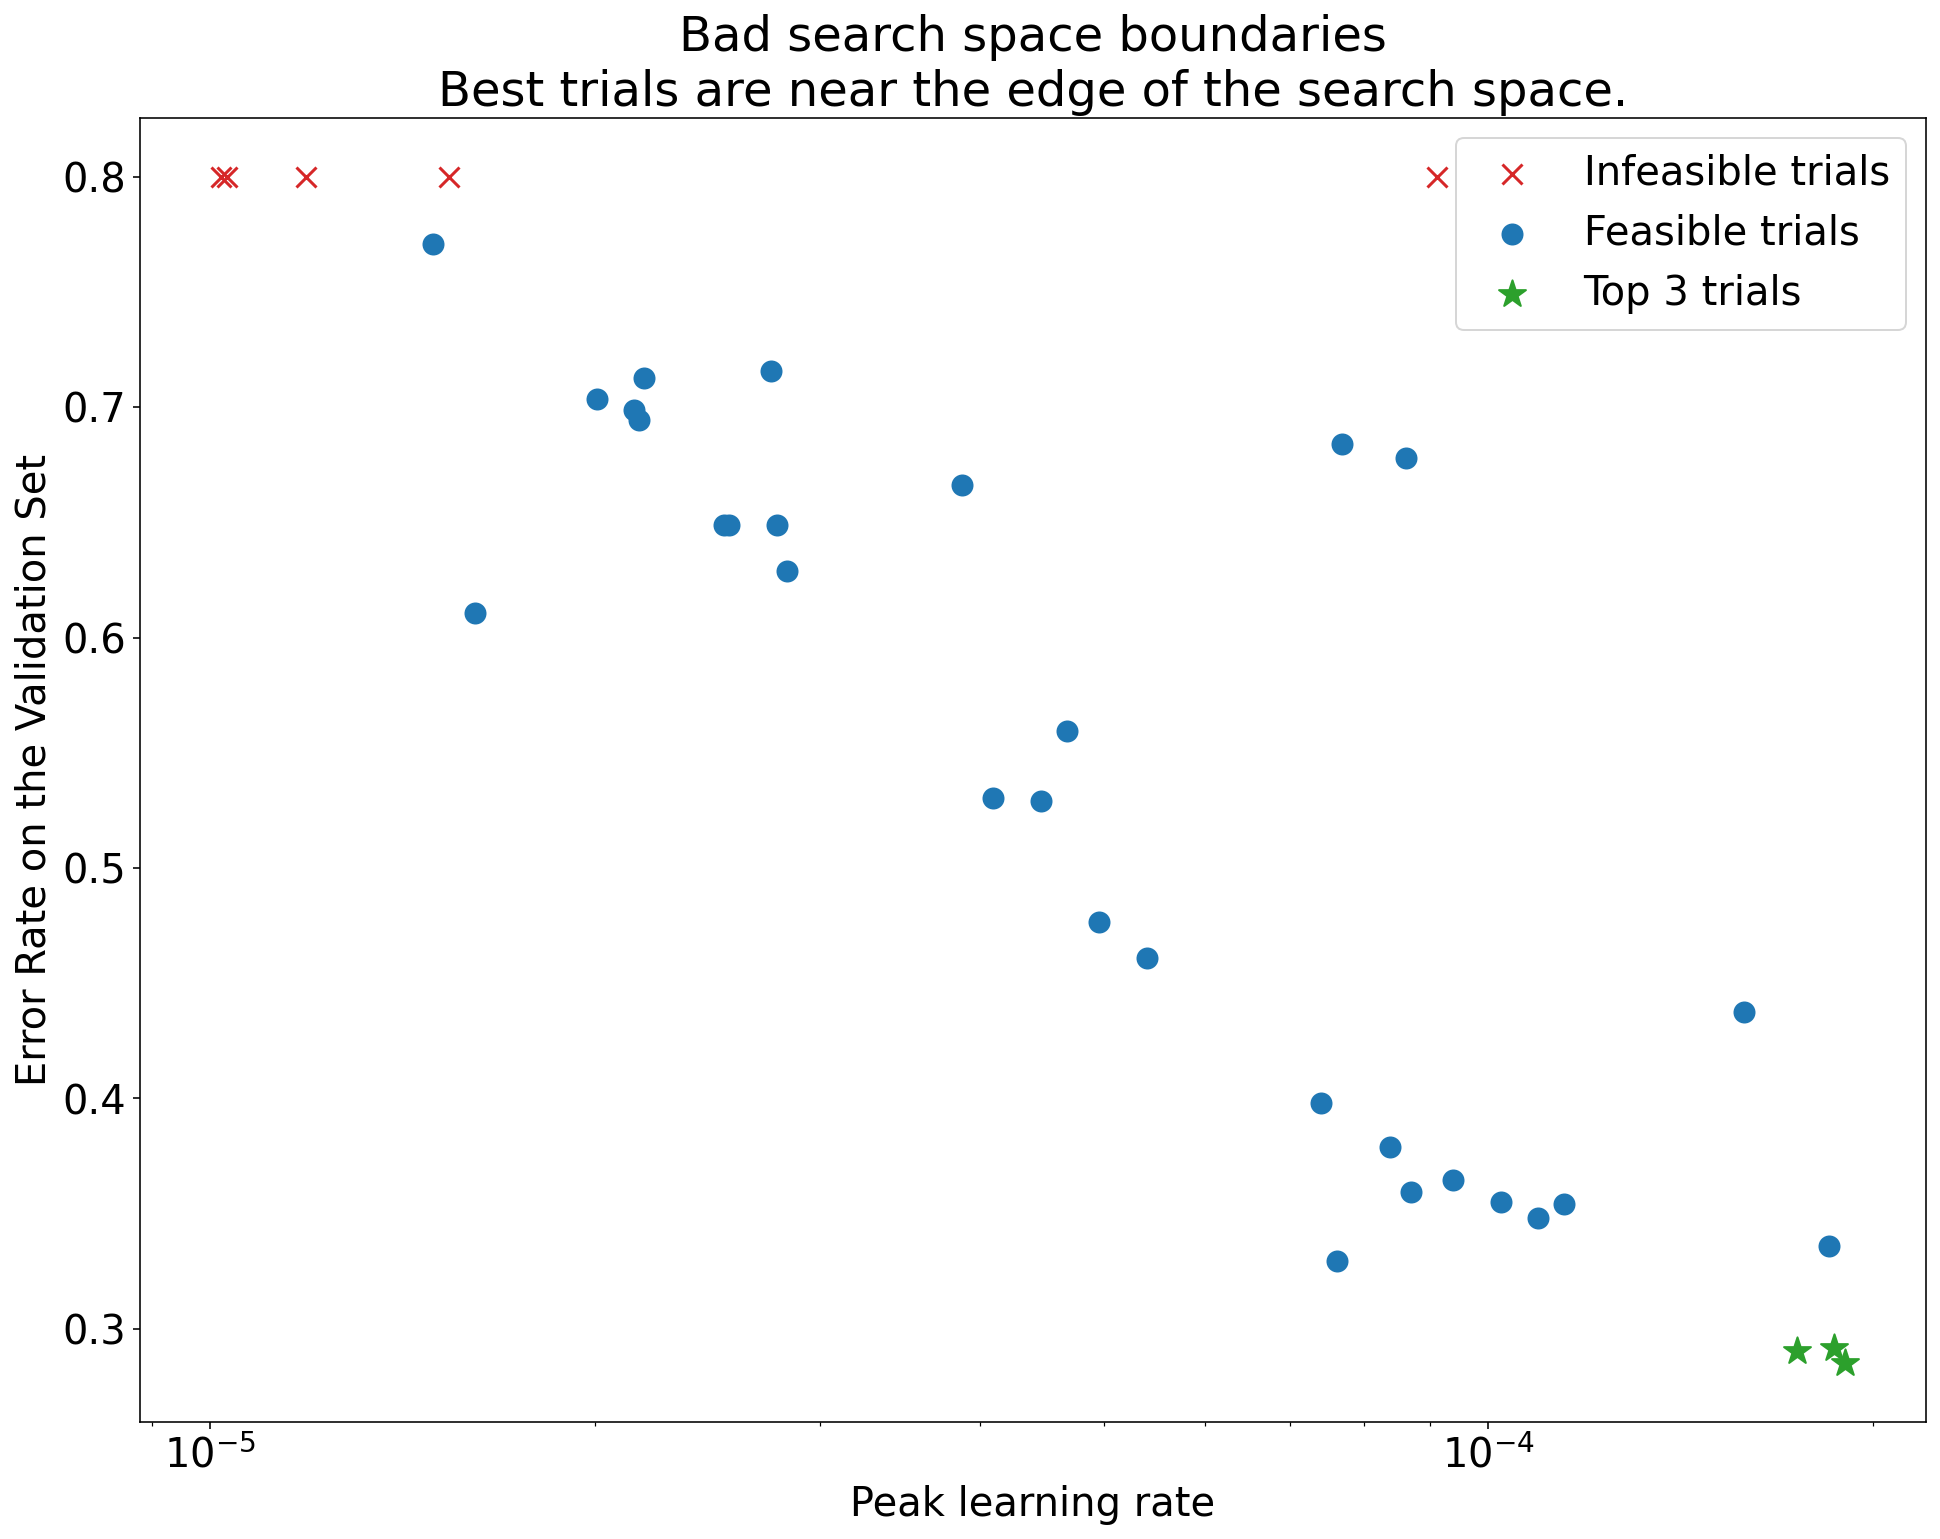 Example of bad search space boundaries